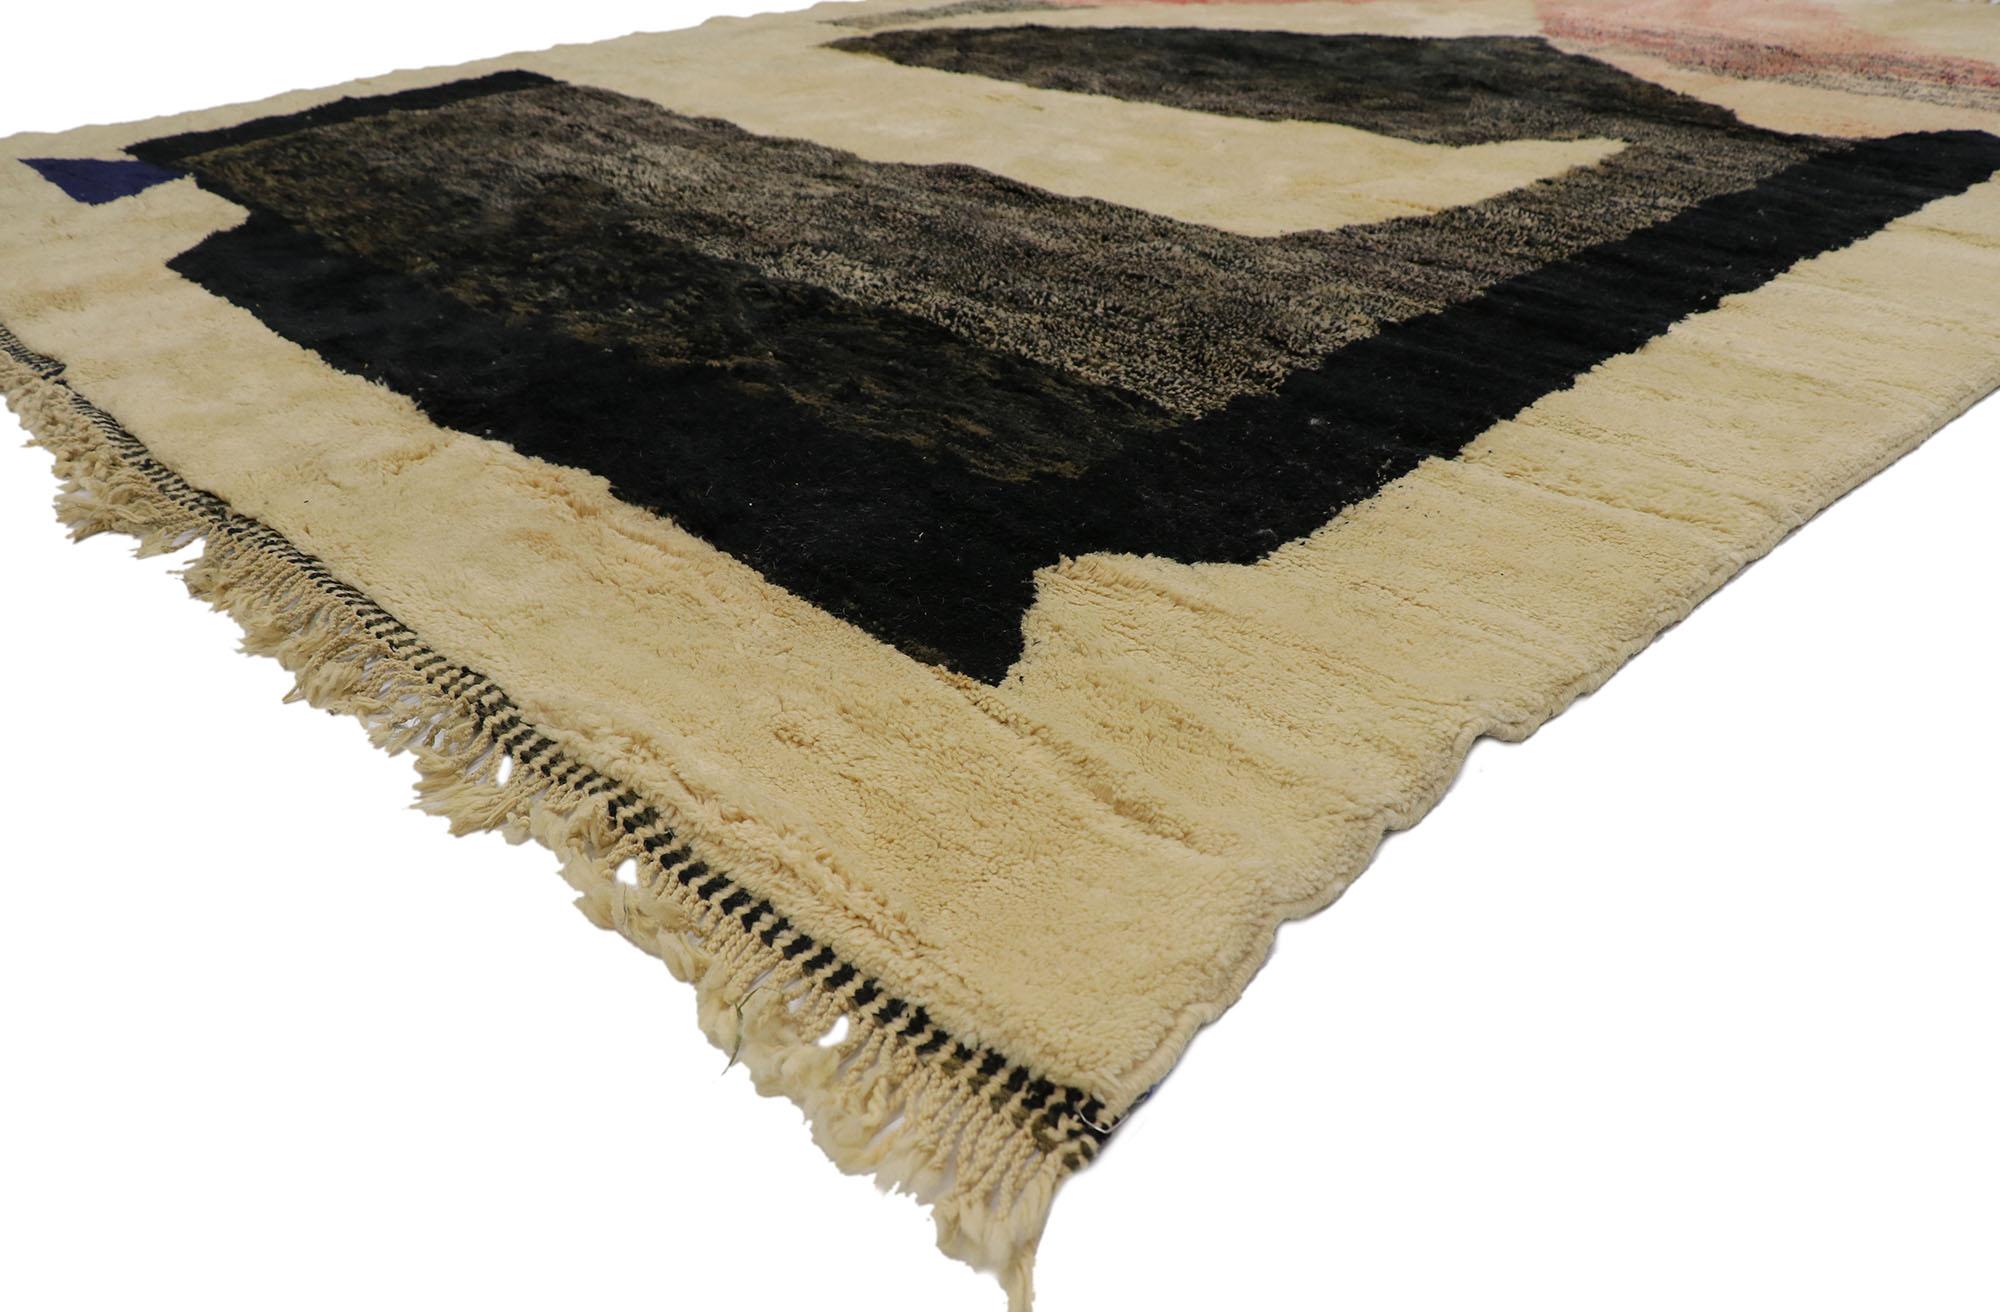 21645 new Contemporary Berber Moroccan rug inspired by Victor Pasmore 10'01 x 13'06. Showcasing a bold expressive design, incredible detail and texture, this hand knotted wool contemporary Berber Moroccan rug is a captivating vision of woven beauty.